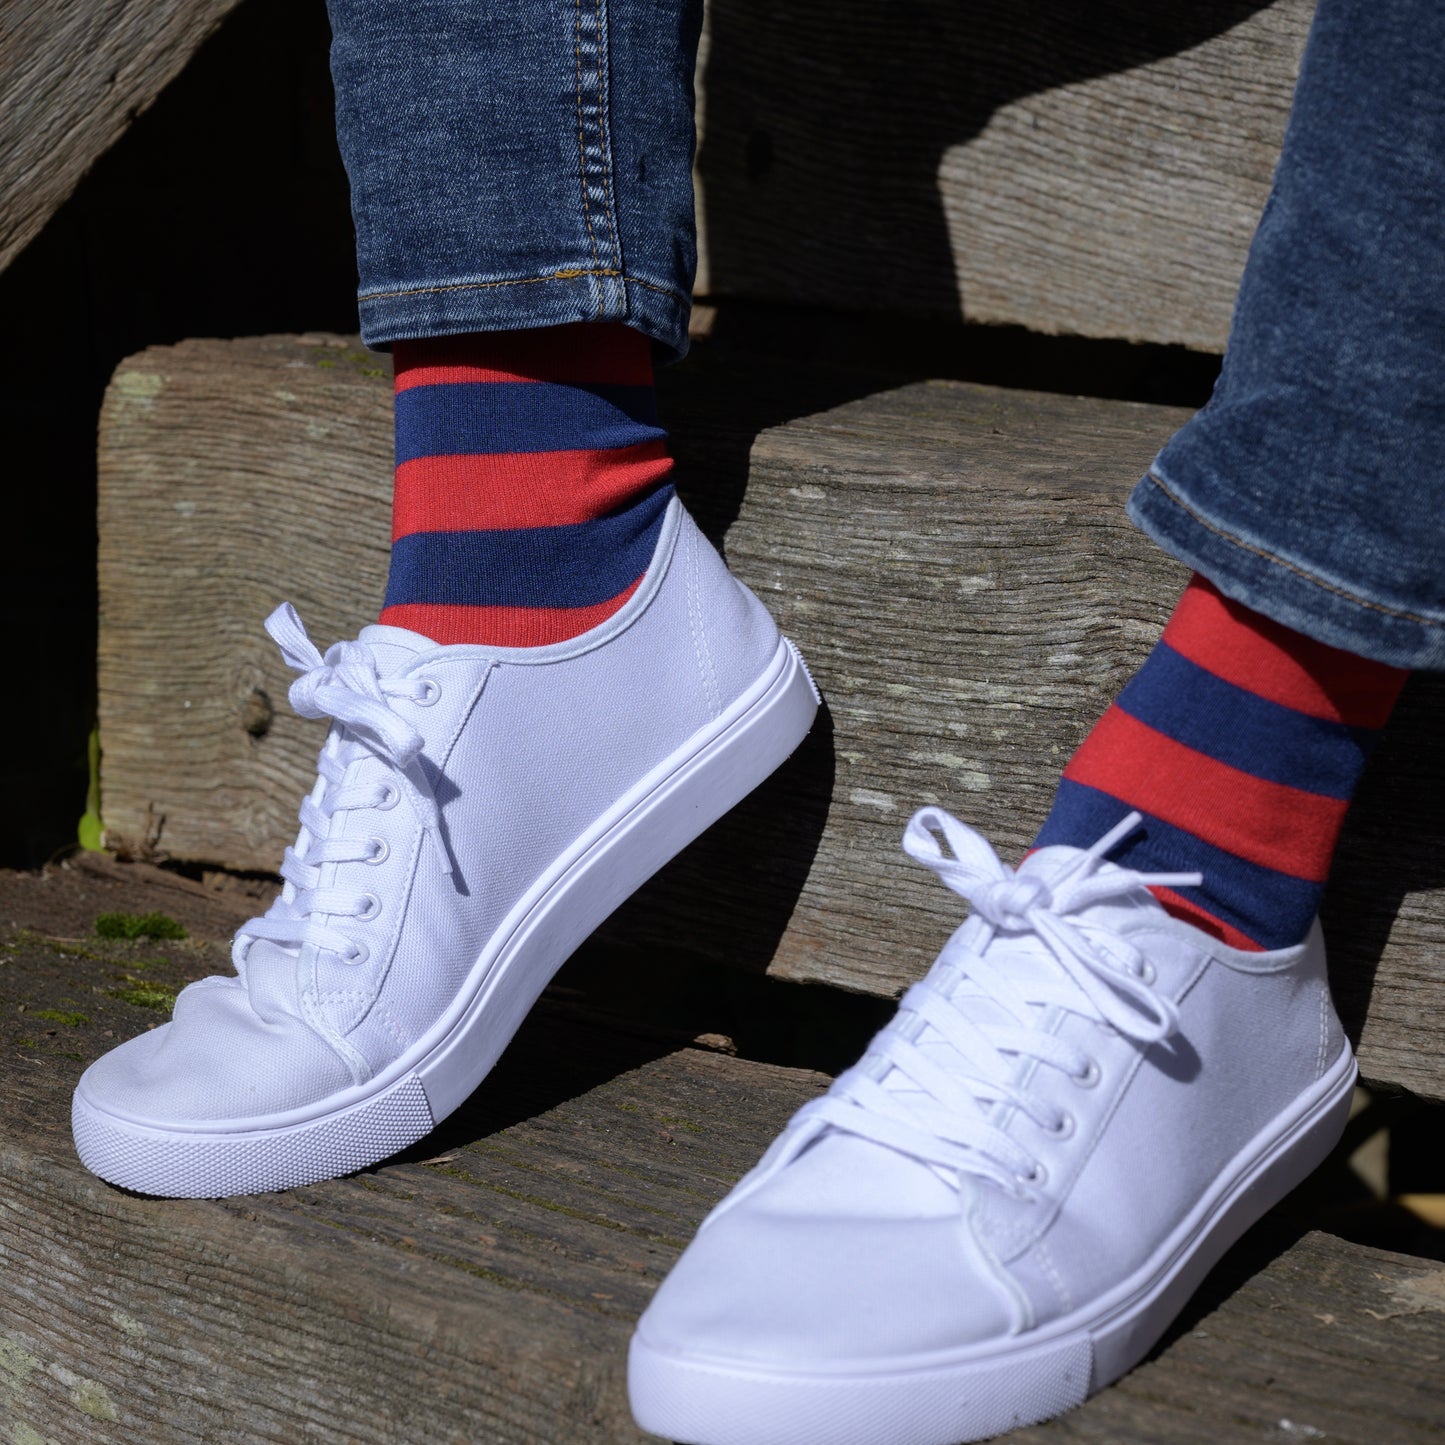 Classic Red Striped Bamboo Socks